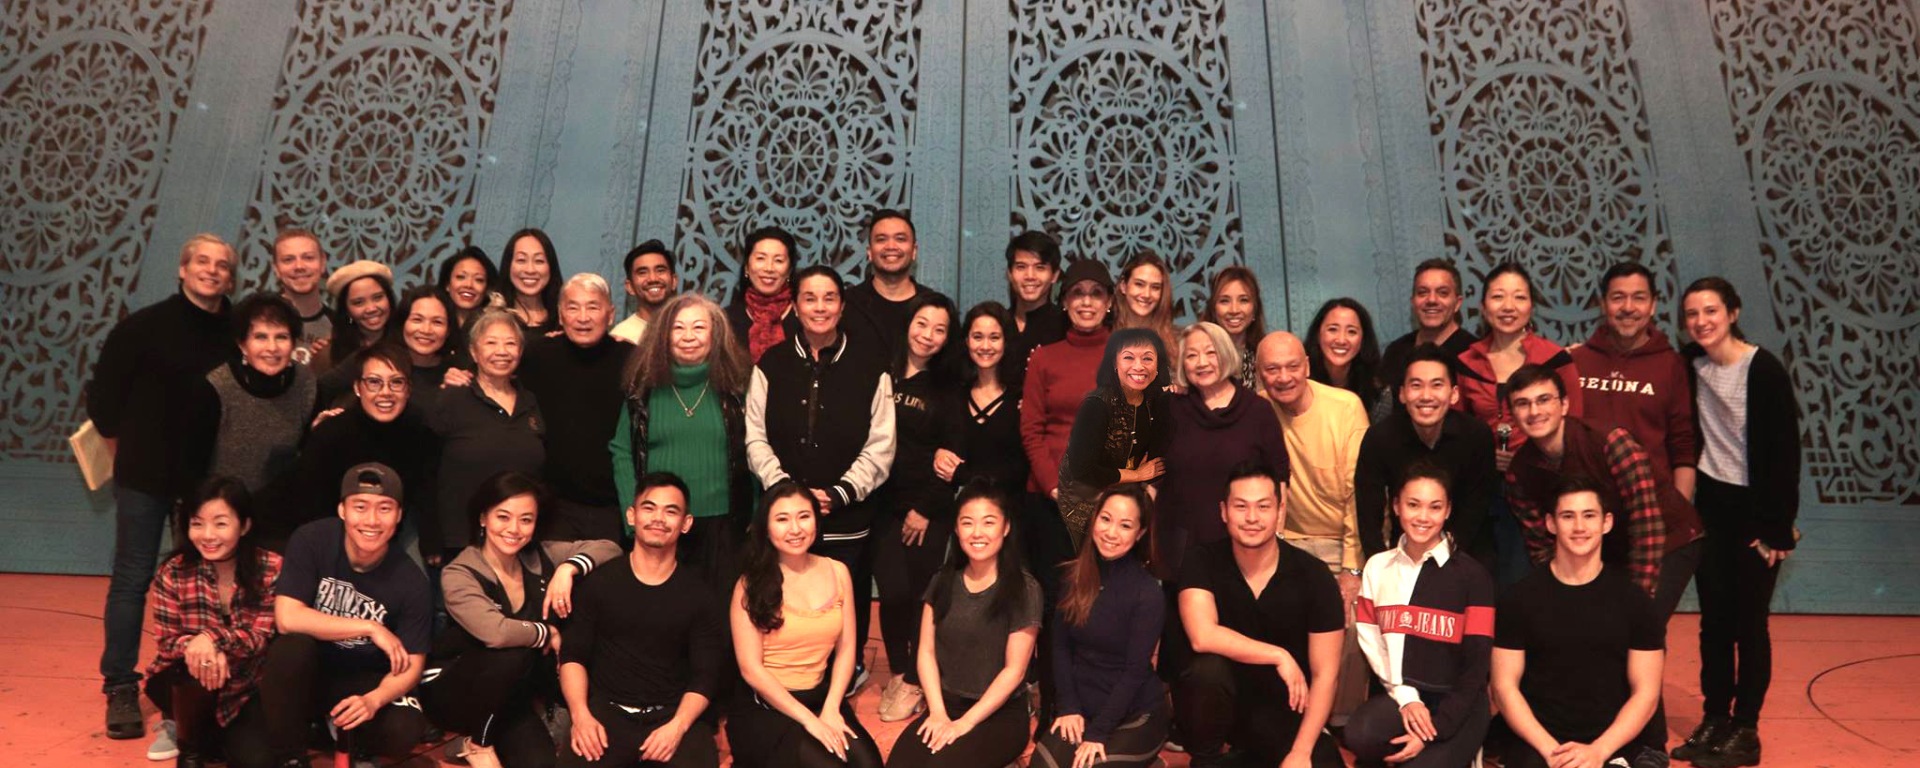 The company on the stage of The New Amsterdam Theatre in New York. Photo by Lia Chang